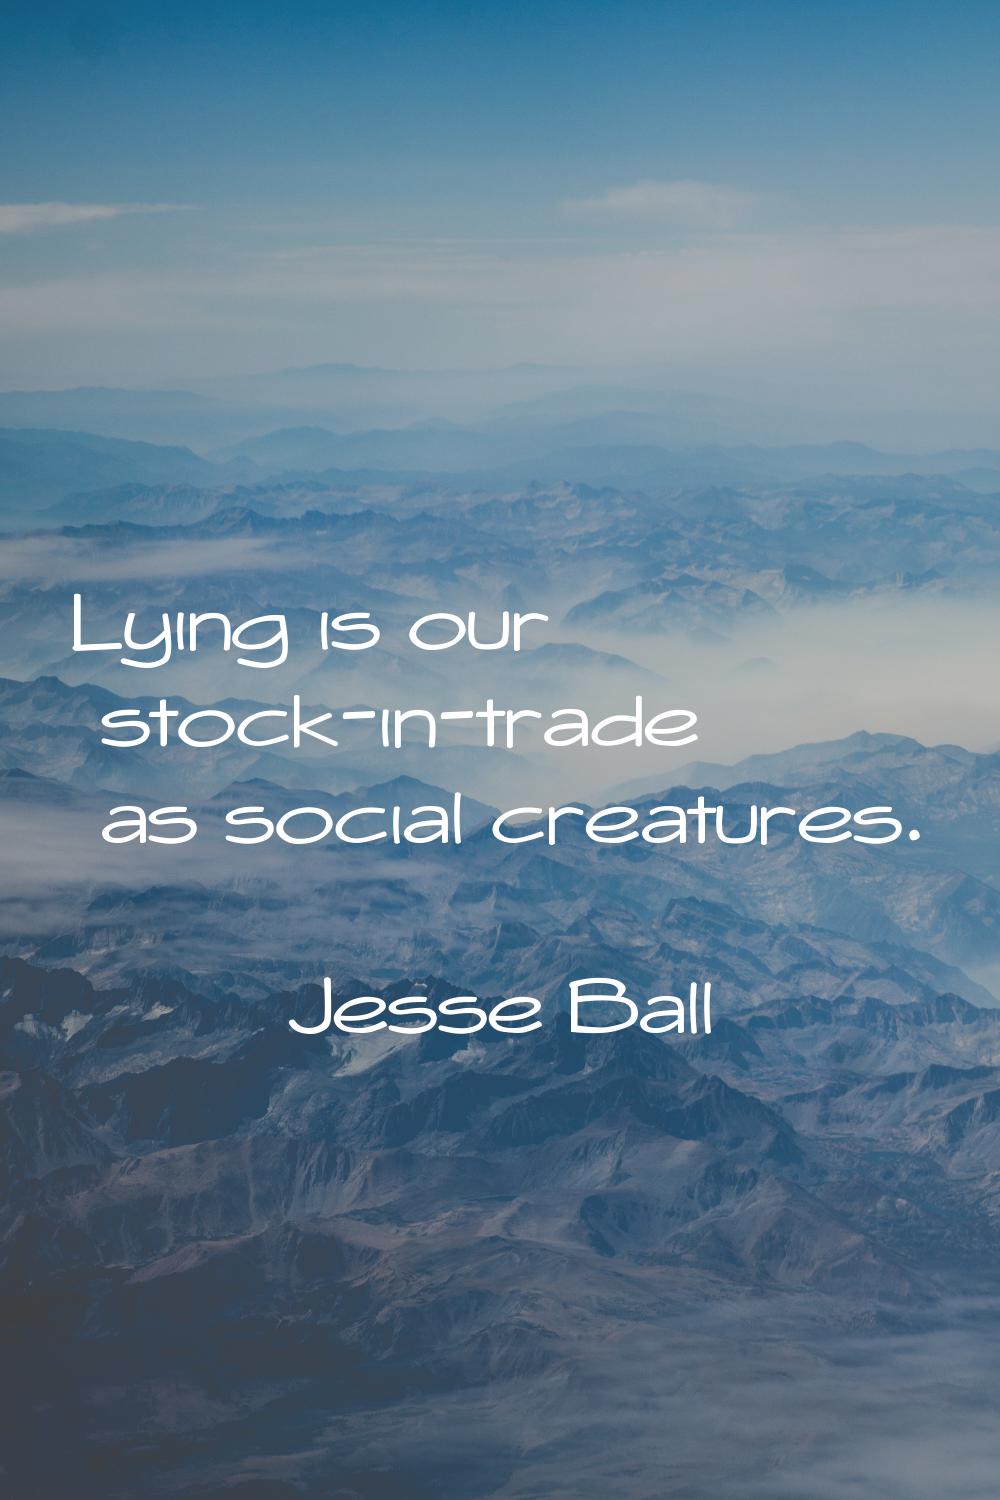 Lying is our stock-in-trade as social creatures.